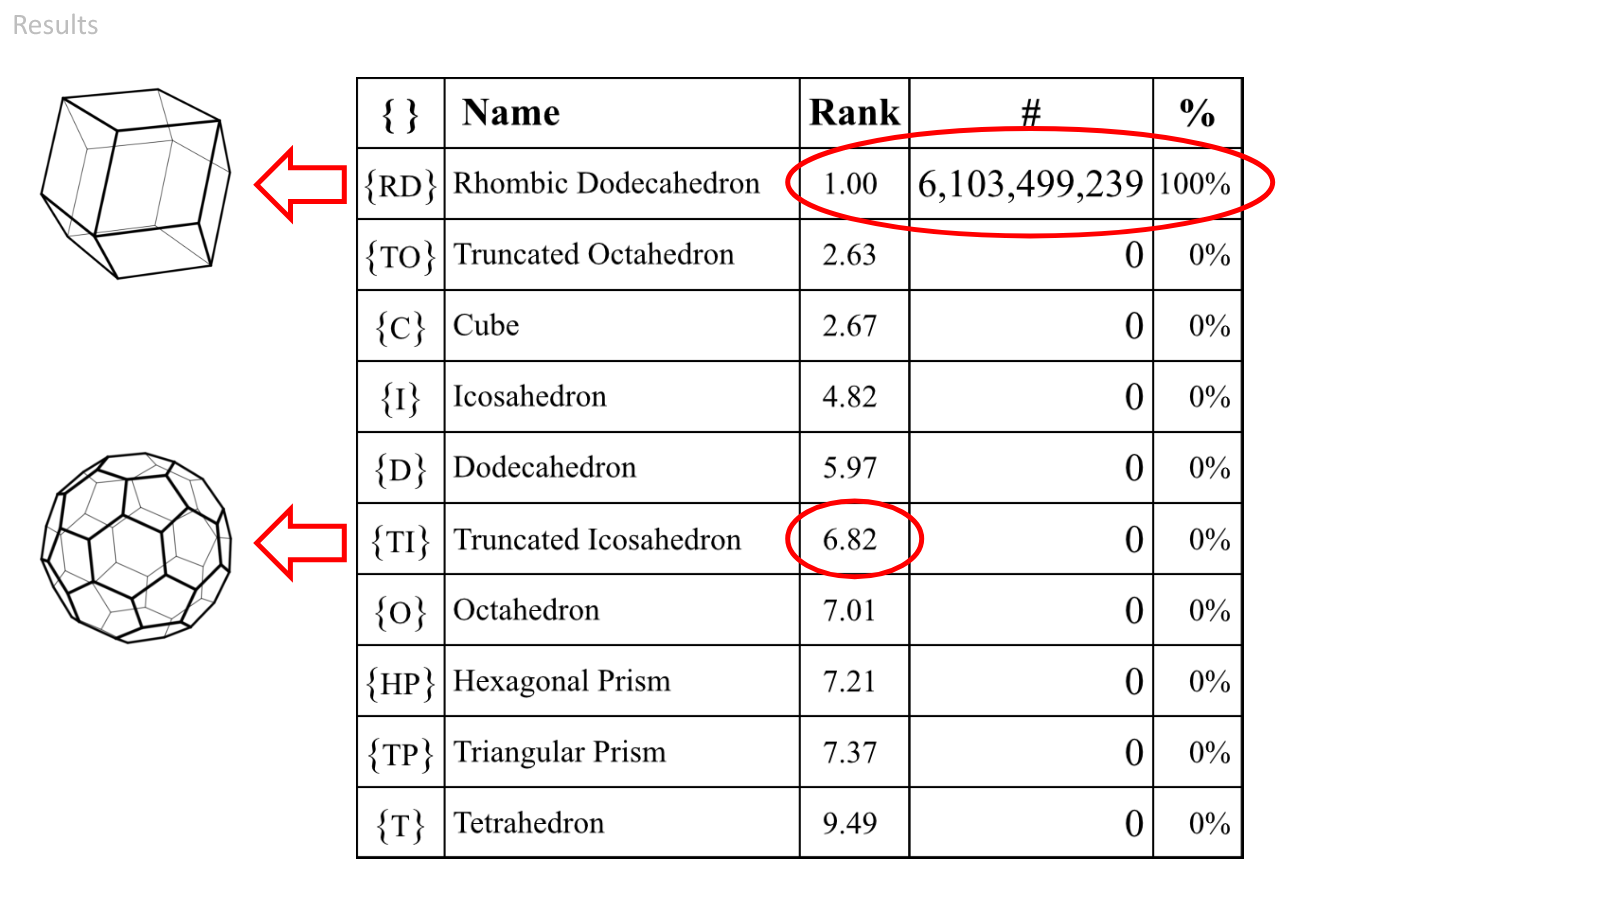  This table shows the candidate polyhedra along with their average ranking, the number of times the polyhedra were ranked first, and the percent of total combinations where the polyhedra were ranked first.   If it's not immediately obvious, I'll call